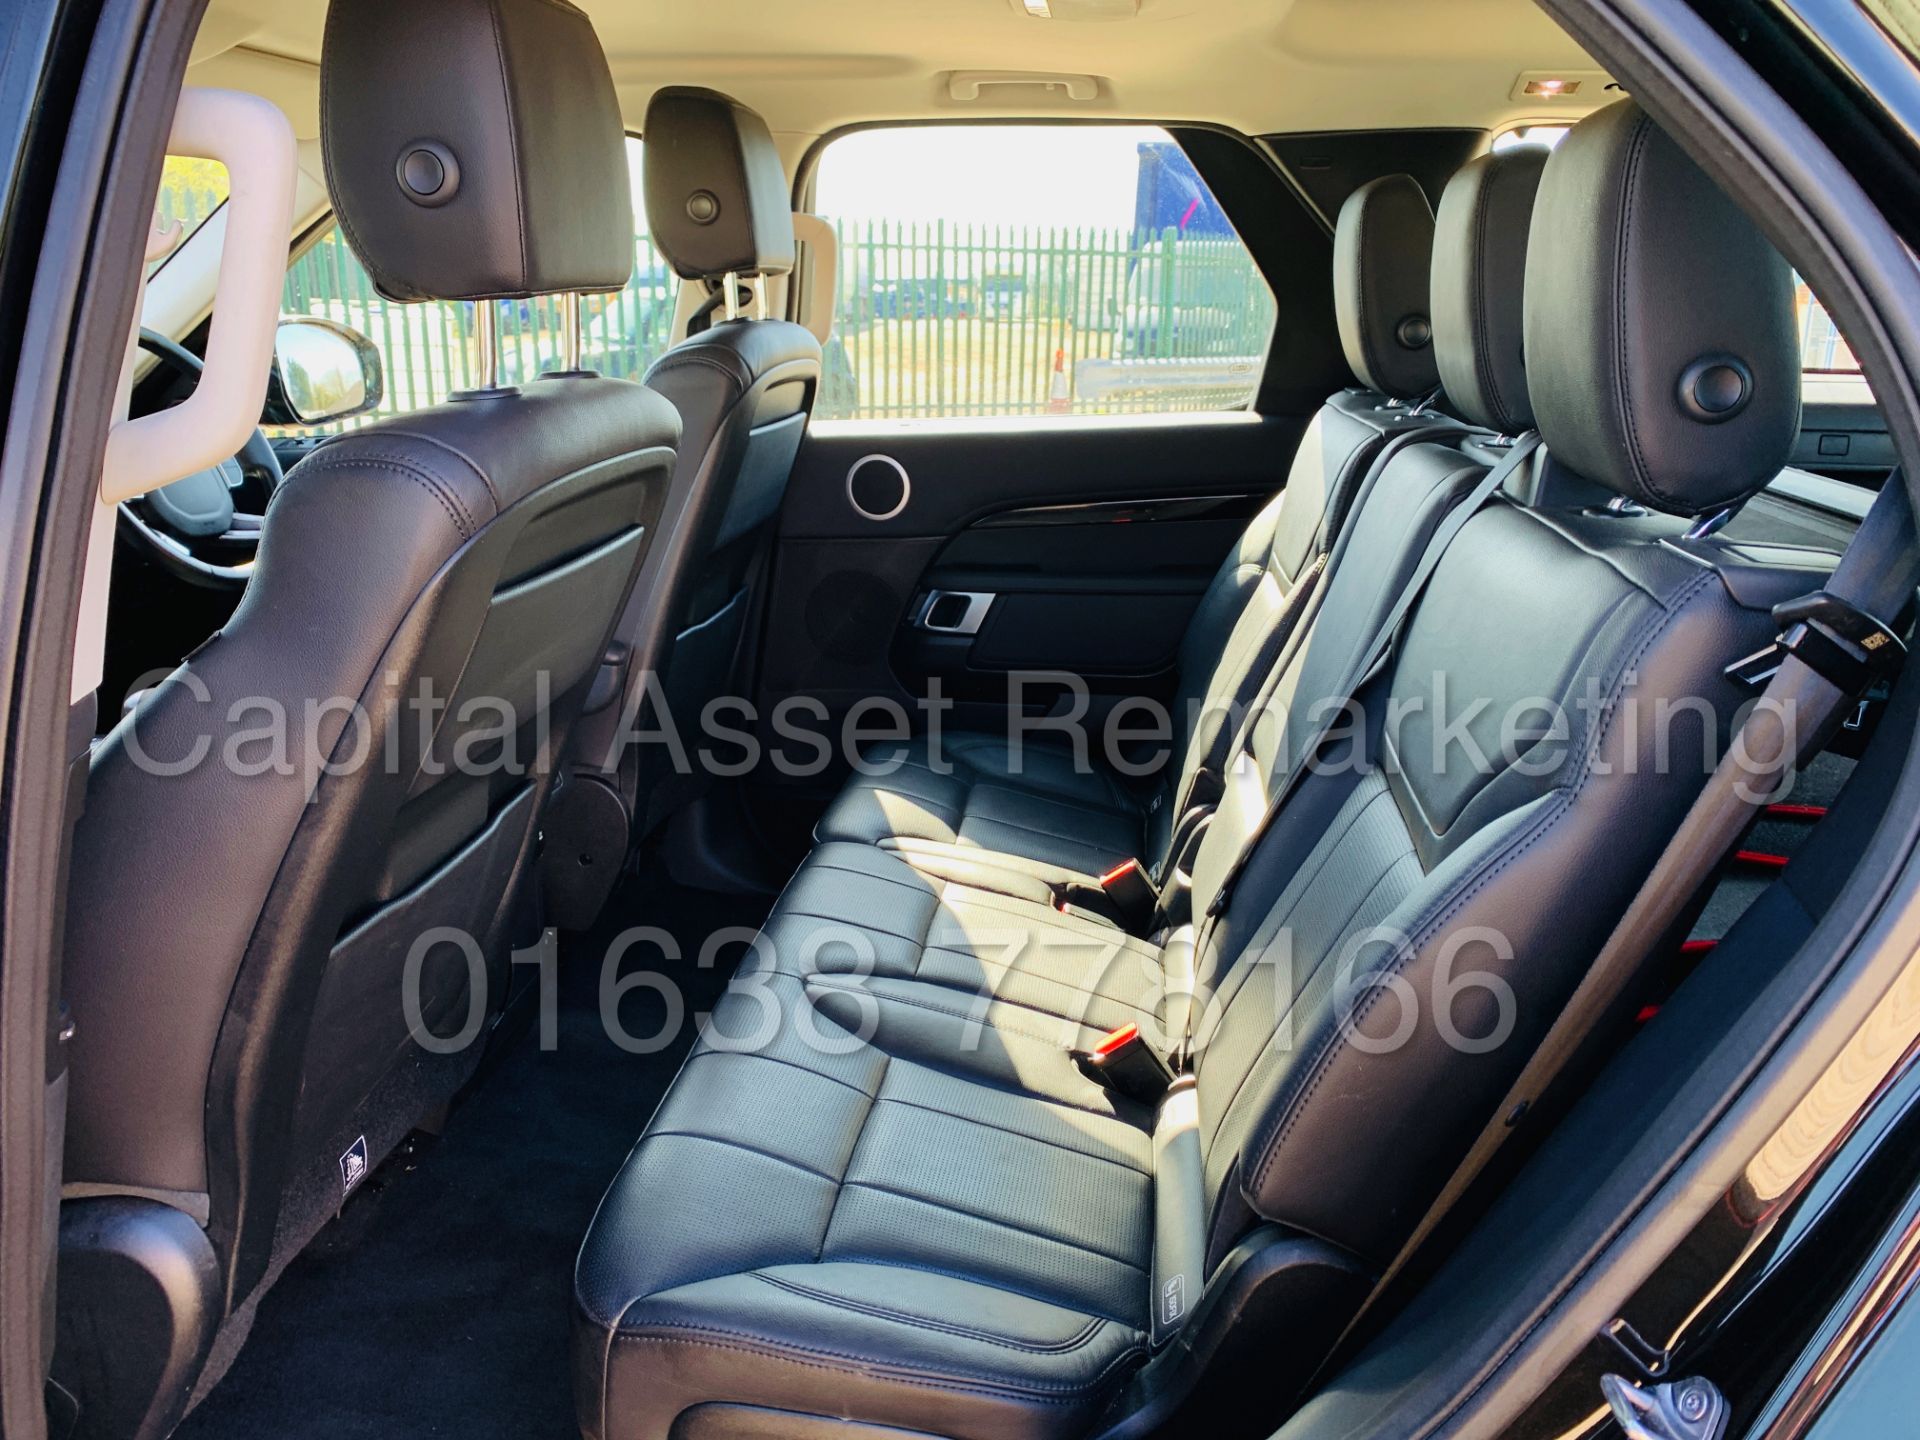 (On Sale) LAND ROVER DISCOVERY *7 SEATER SUV* (67 REG) 'AUTO-LEATHER-SAT NAV' *38,000 MILES* - Image 27 of 59